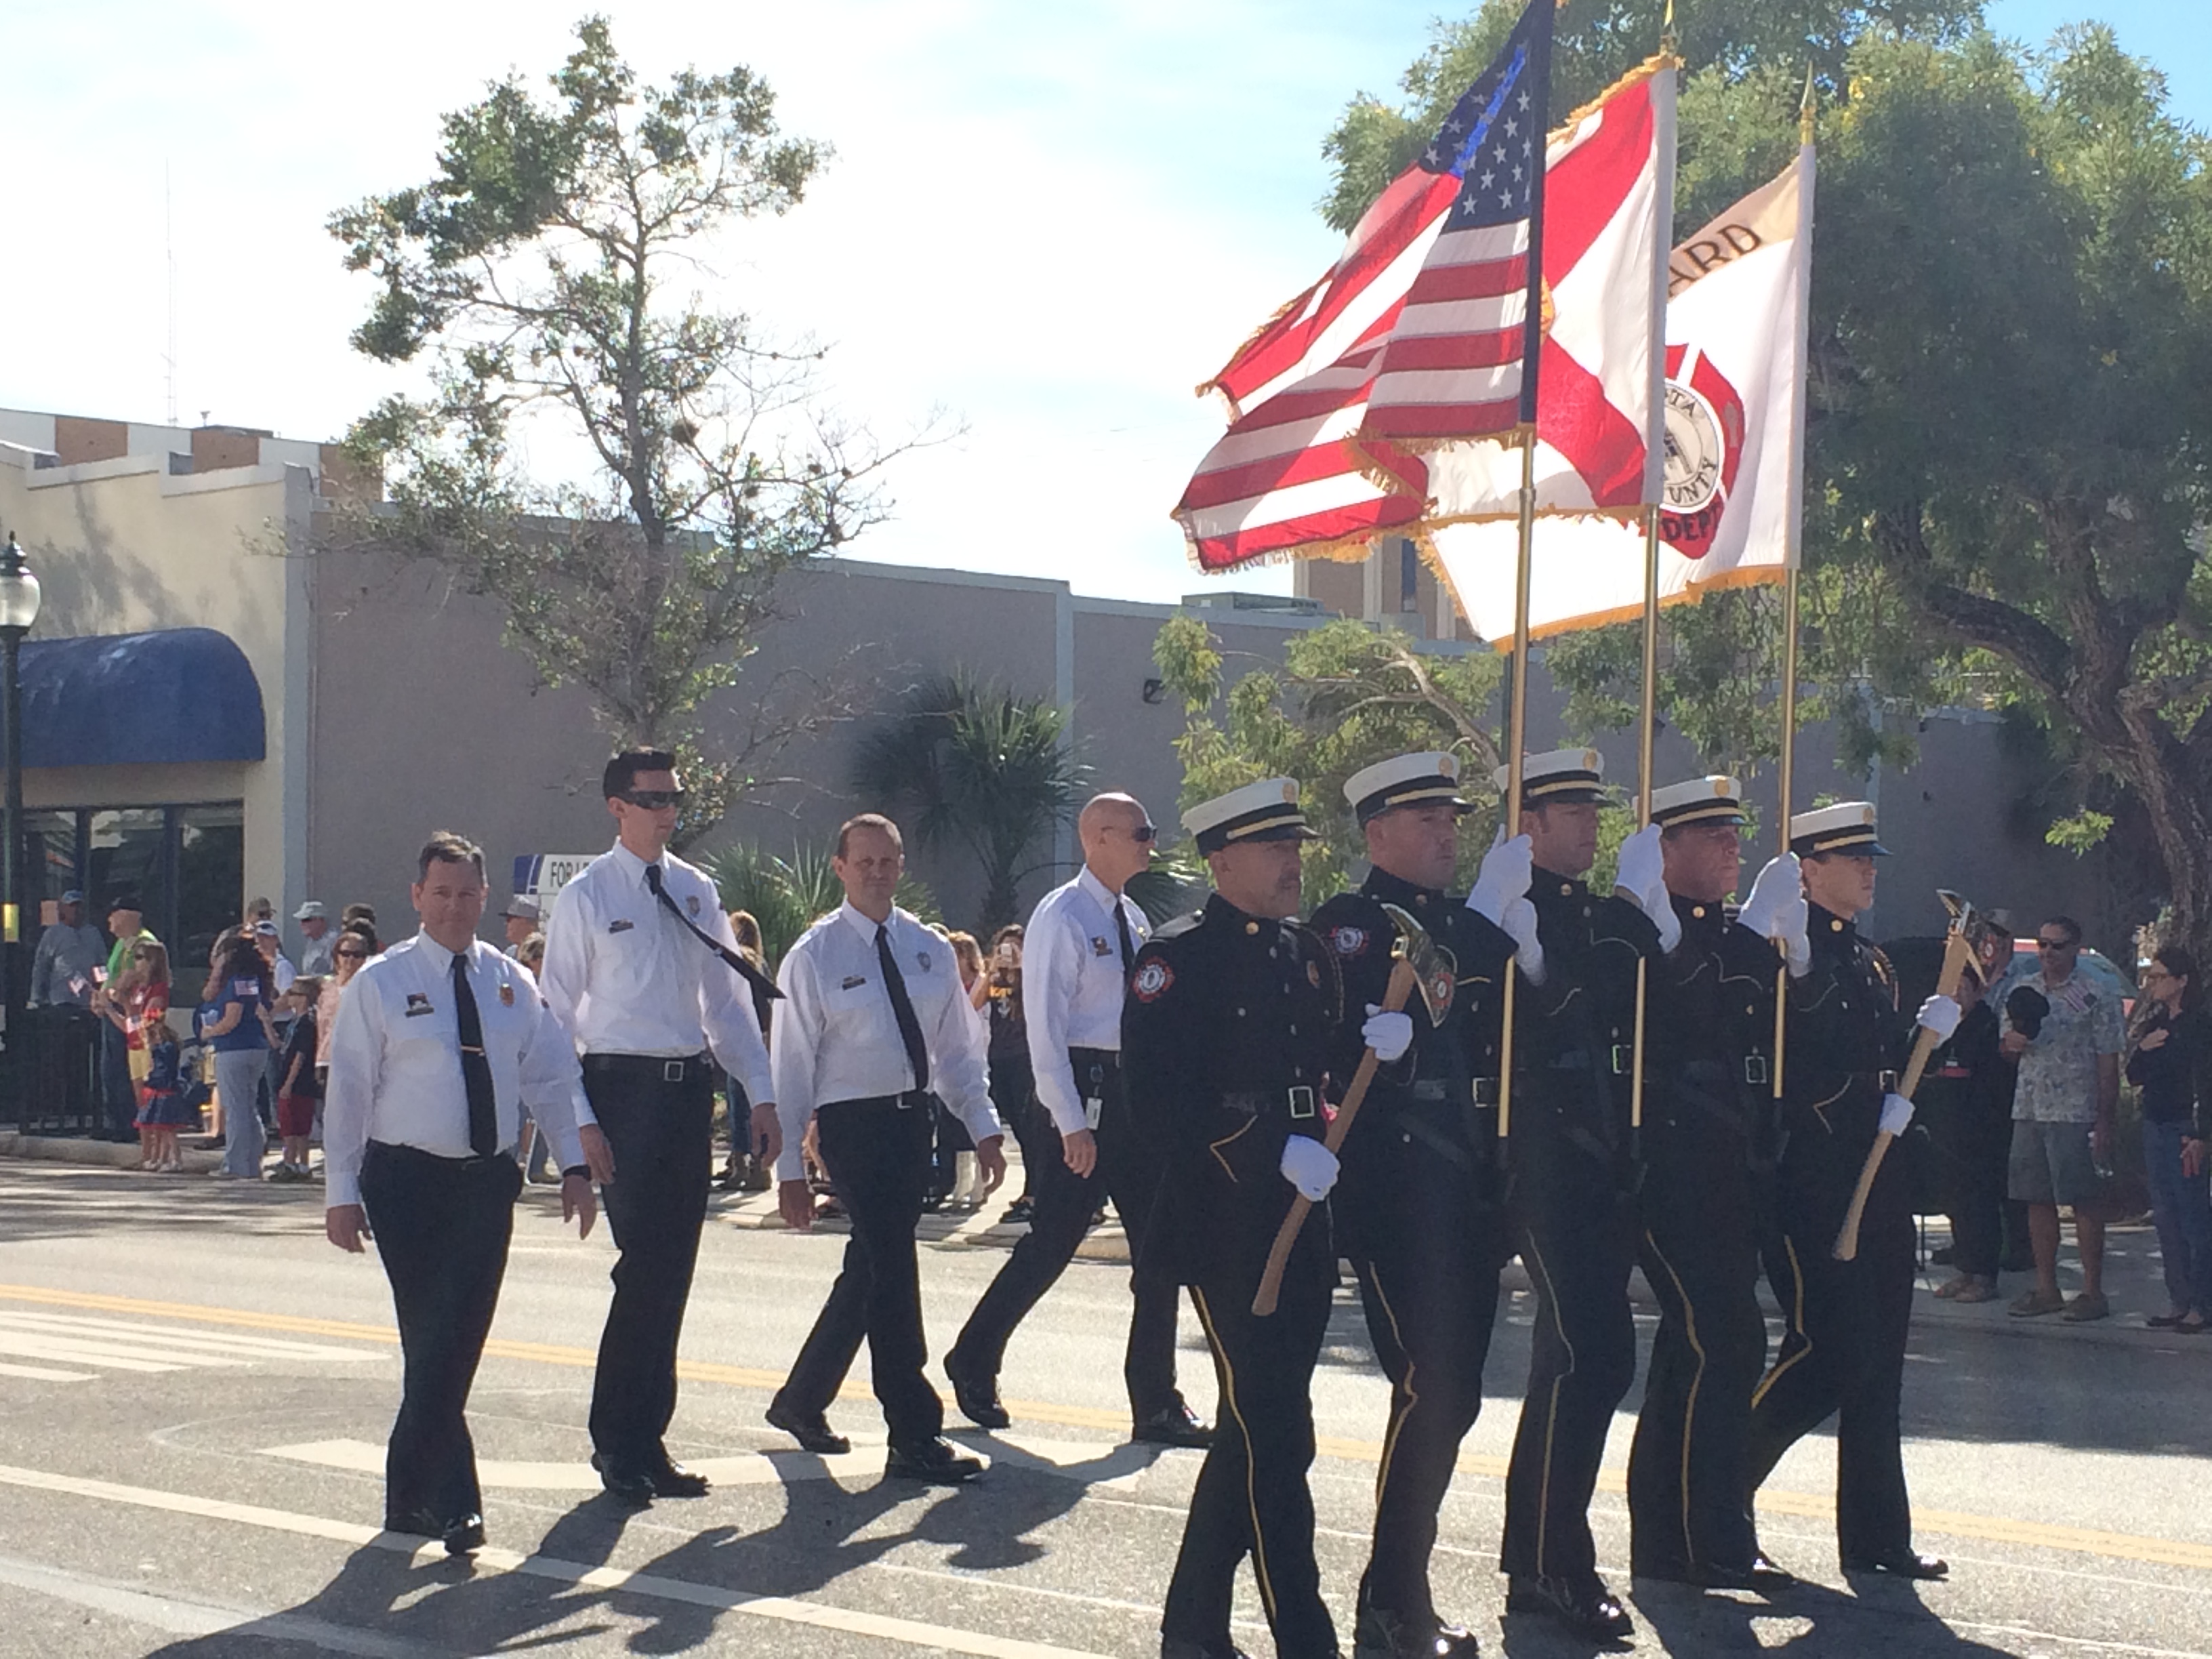 Veterans Day Parade brings Sarasota together to celebrate service The